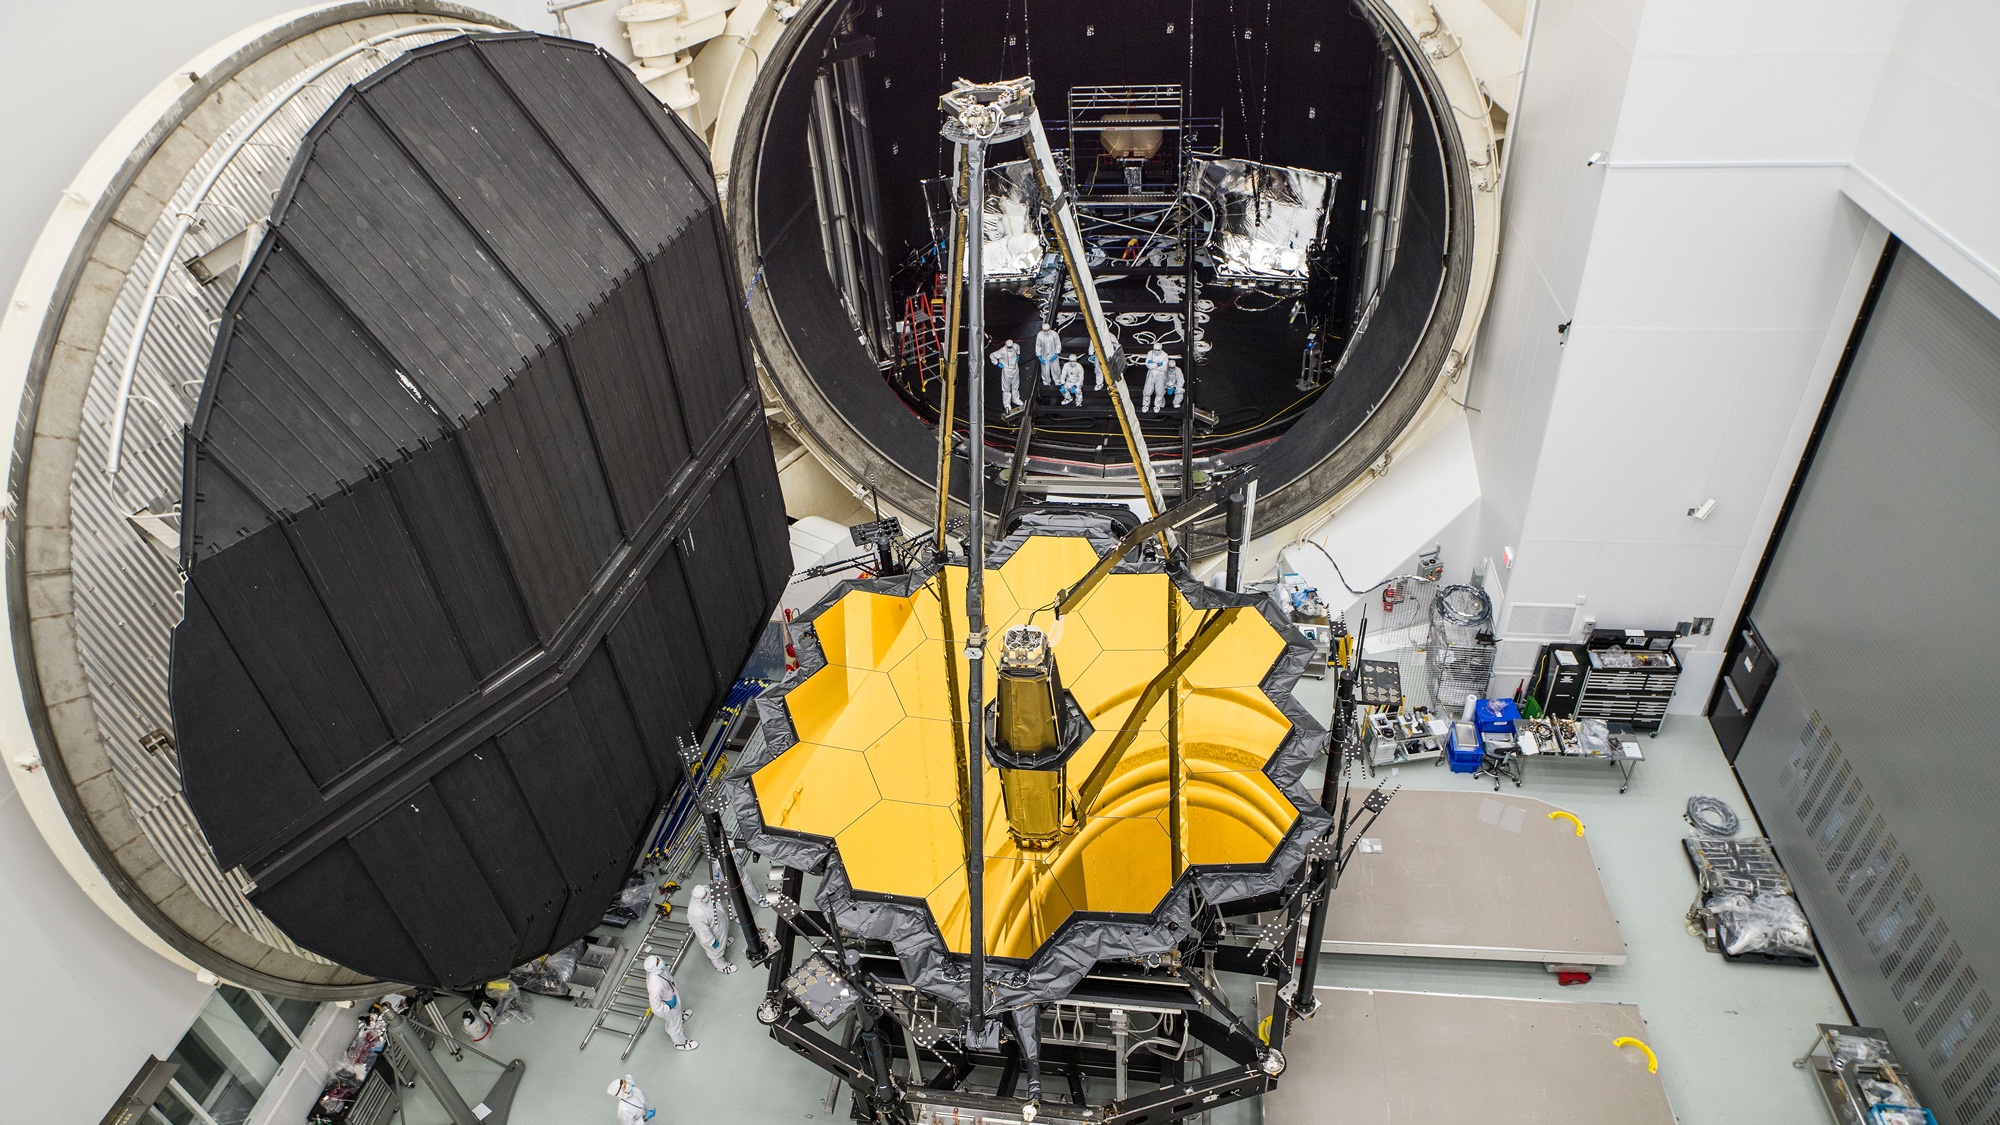 This NASA photographer documented the 30-year journey to build the James Webb Space Telescope